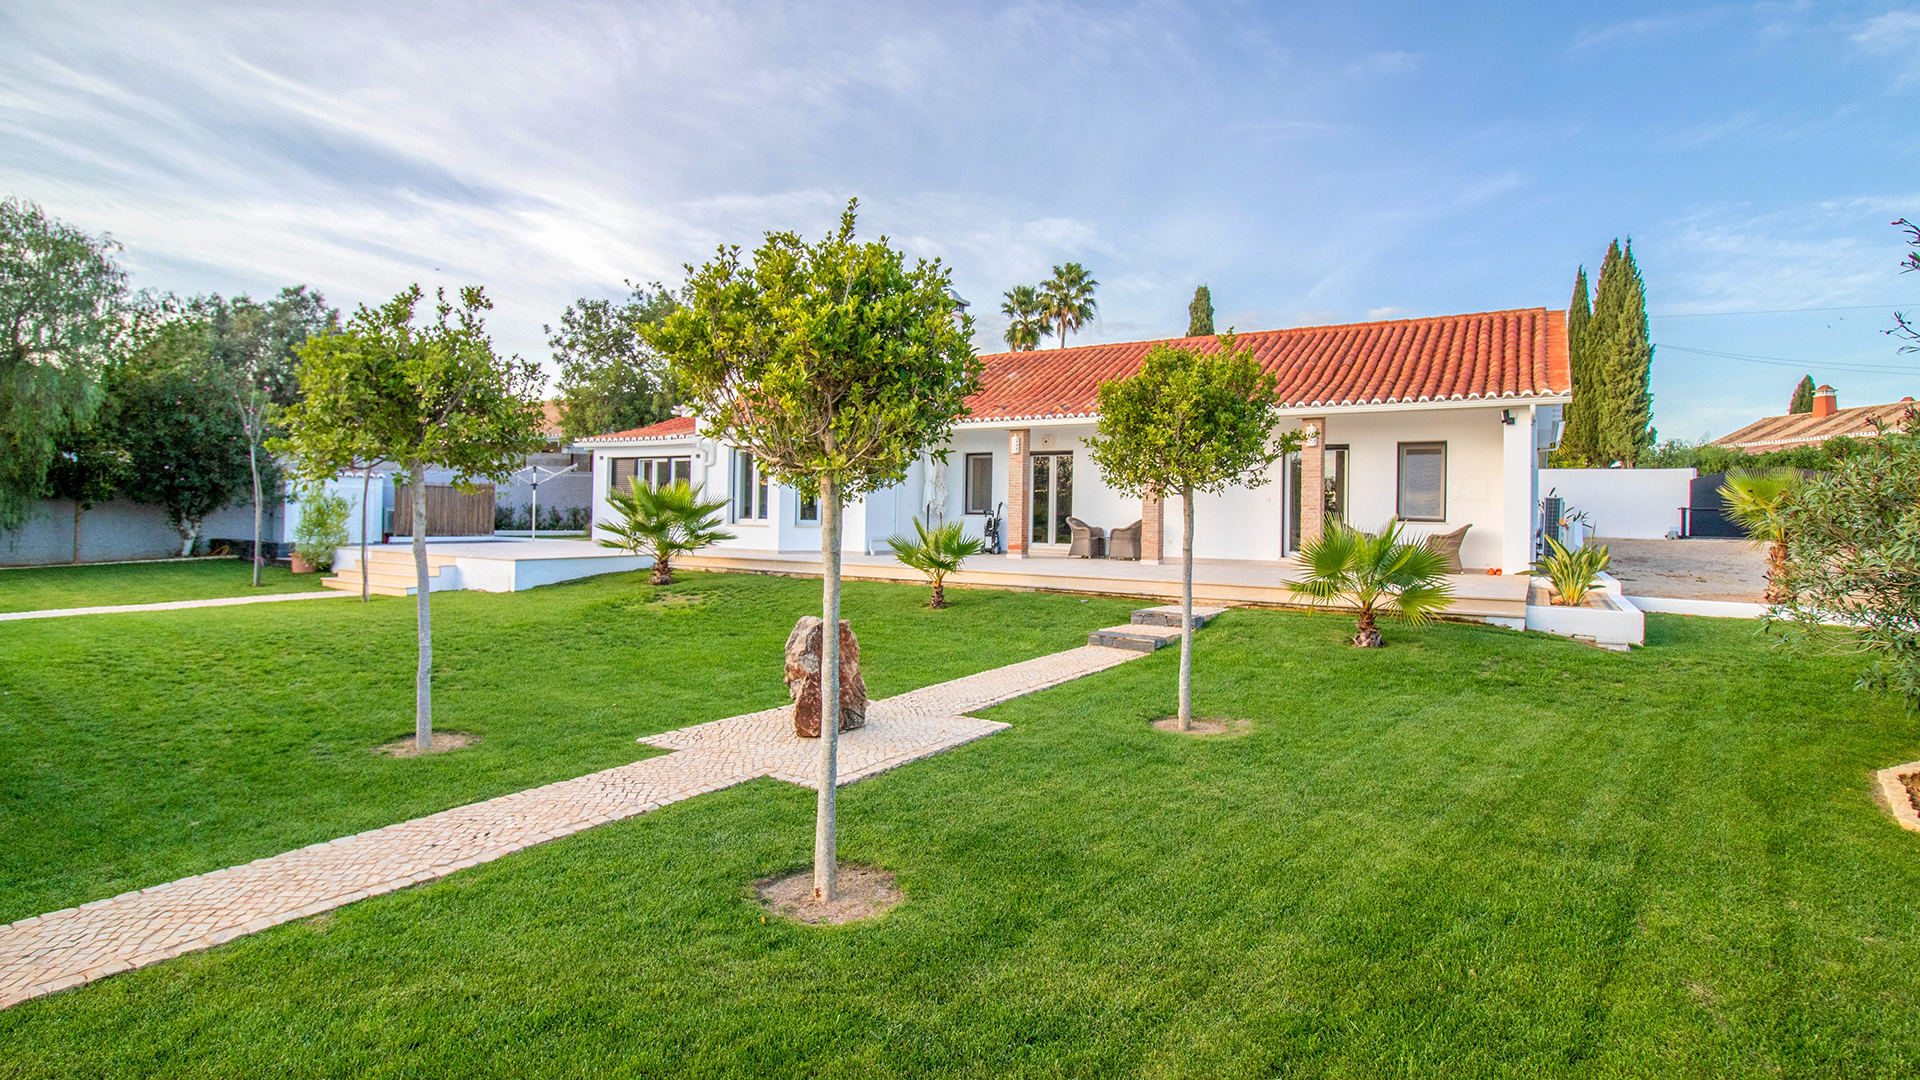 Modern and luxury 4 bedroom villa with pool and annex near Lagoa, West Algarve | PPP2226 Modern and luxurious 4 bedroom villa with annexe in a quiet and popular residential area. Completely renovated this year and fitted out to a very high specification and quality.